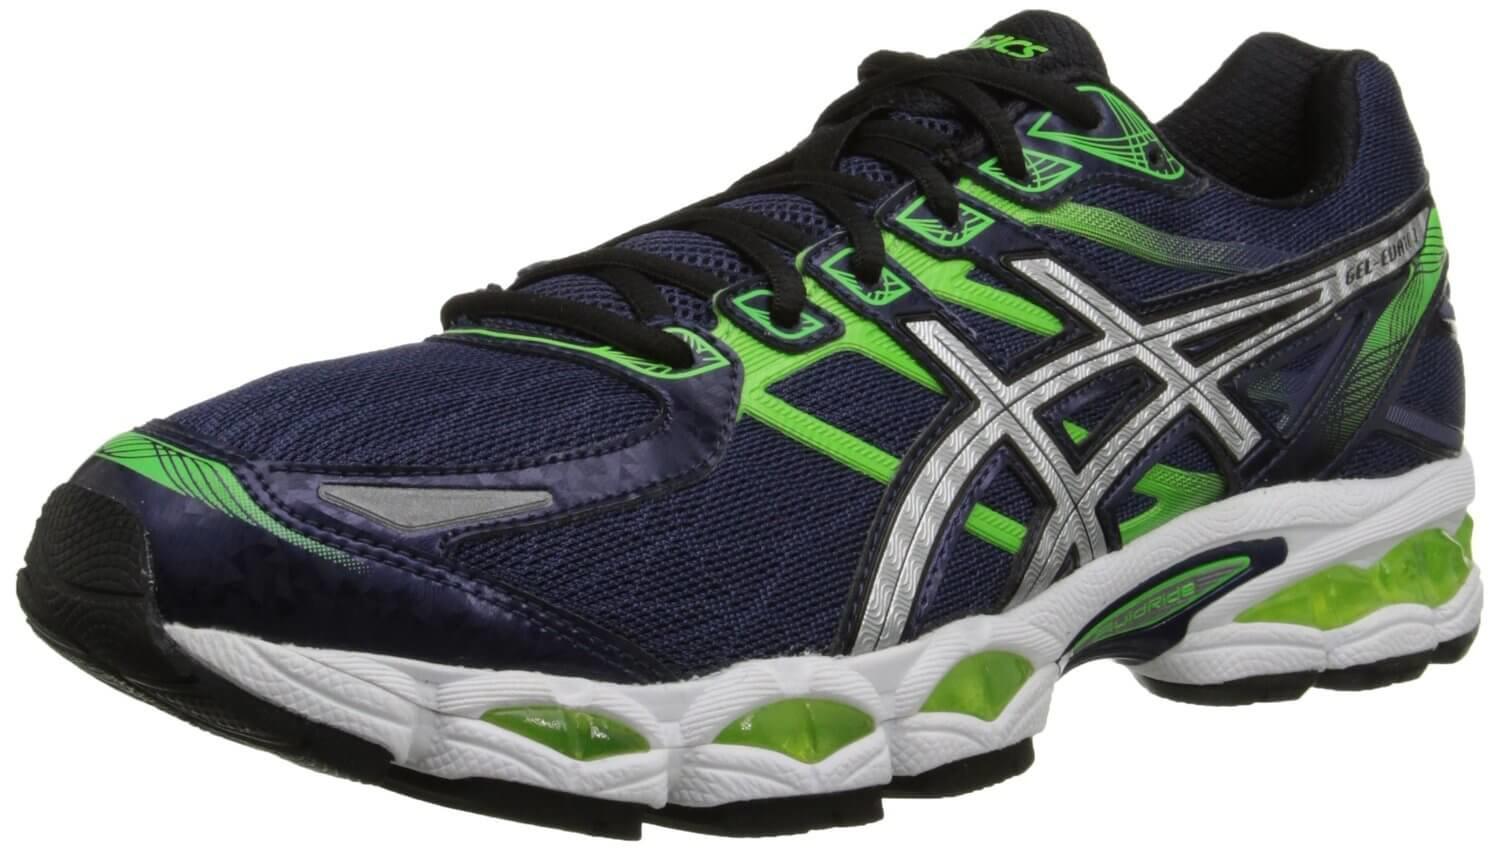 Asics Gel Evate 3 Reviewed & Fully Compared 1